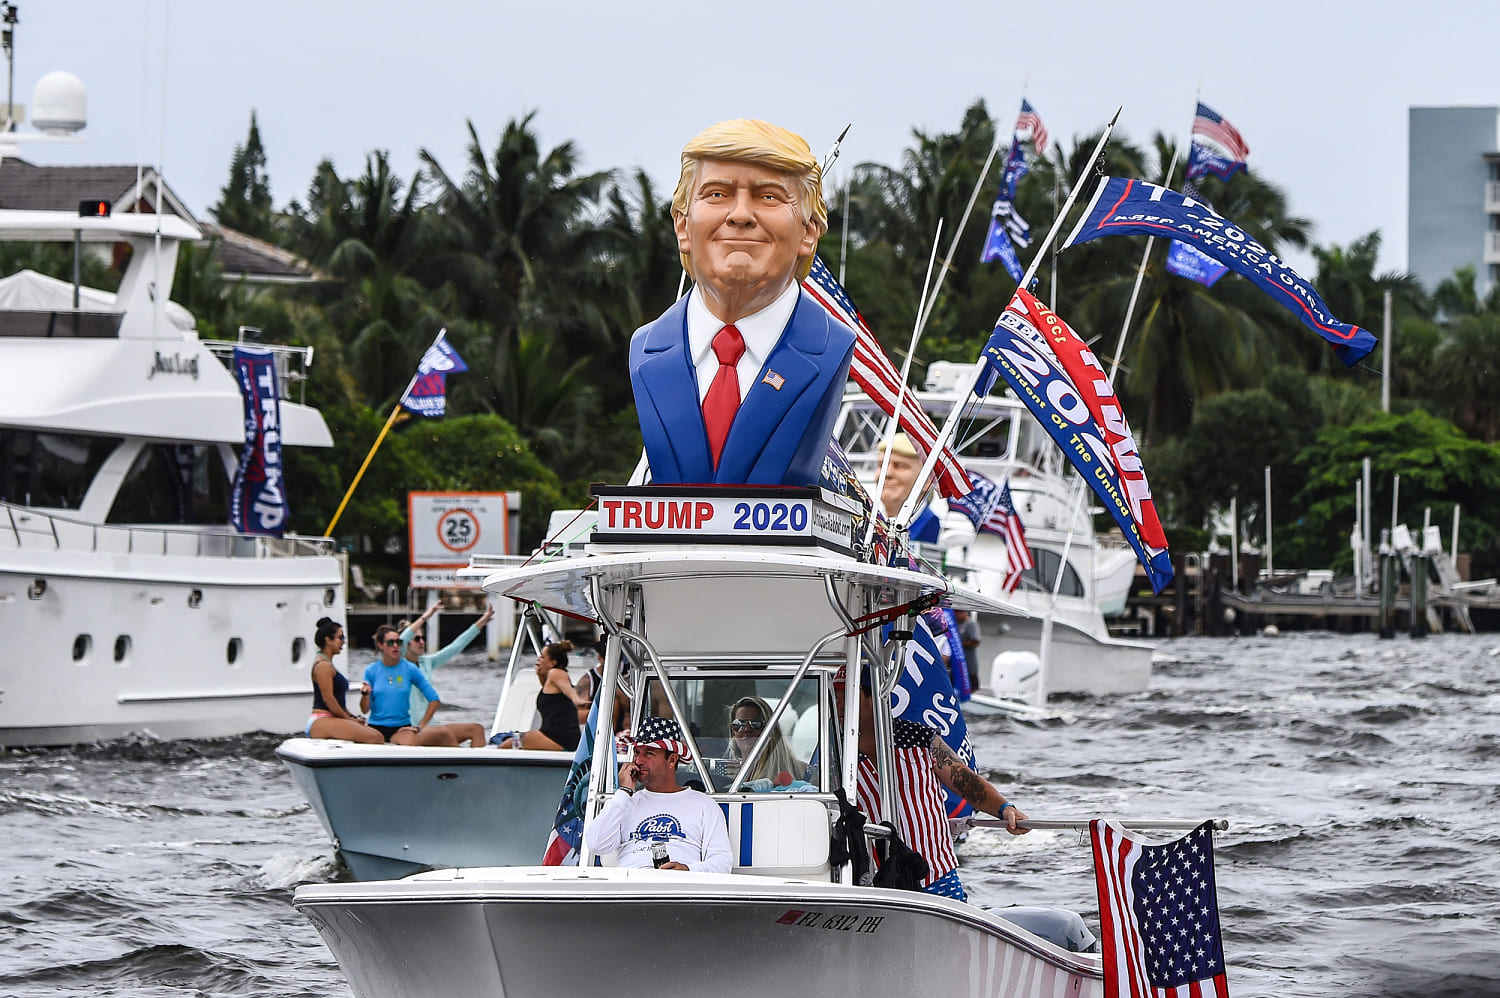 Why Trump’s weird rant about boats, batteries and sharks matters